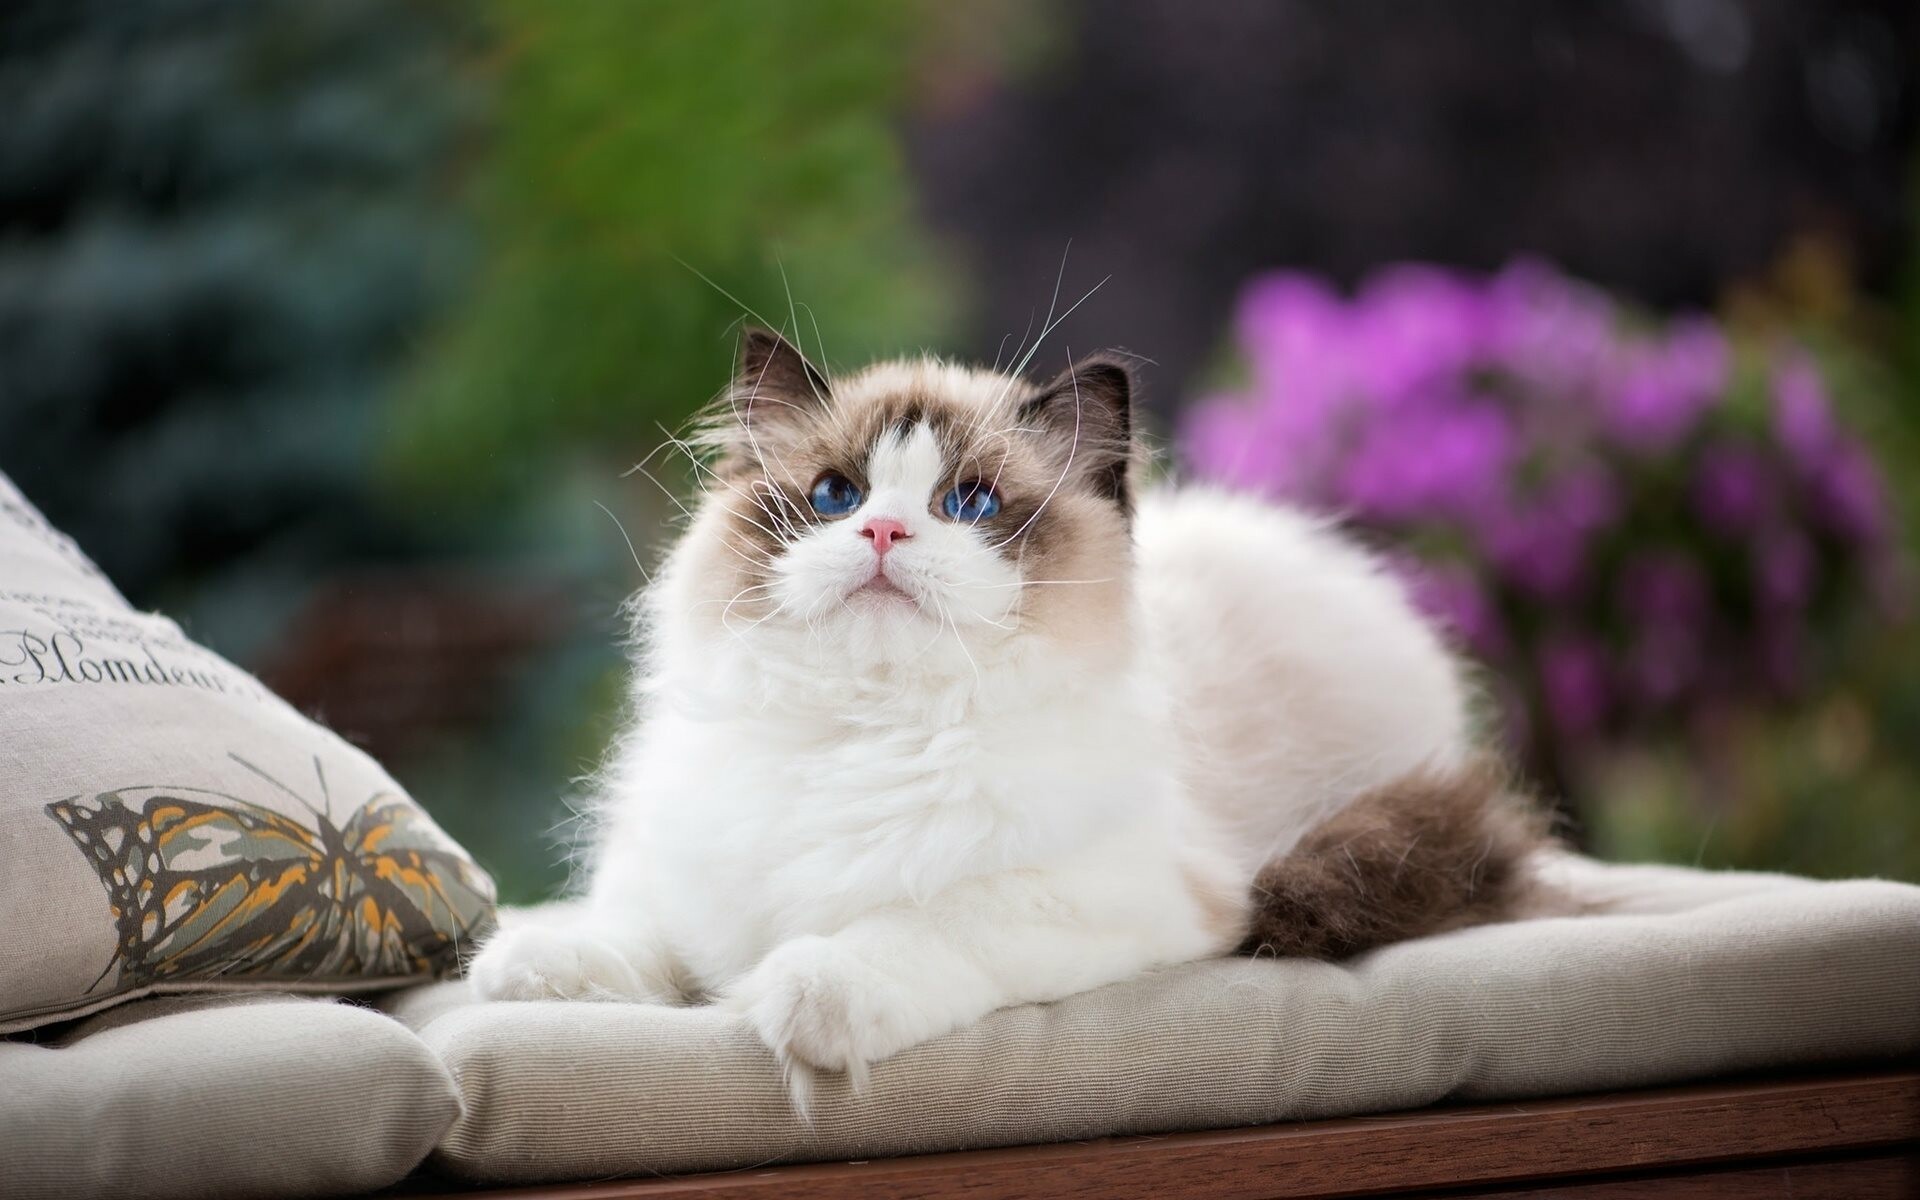 Ragdoll: These cats are fluffy, affectionate and playful, with large blue eyes and a keen brain. 1920x1200 HD Wallpaper.